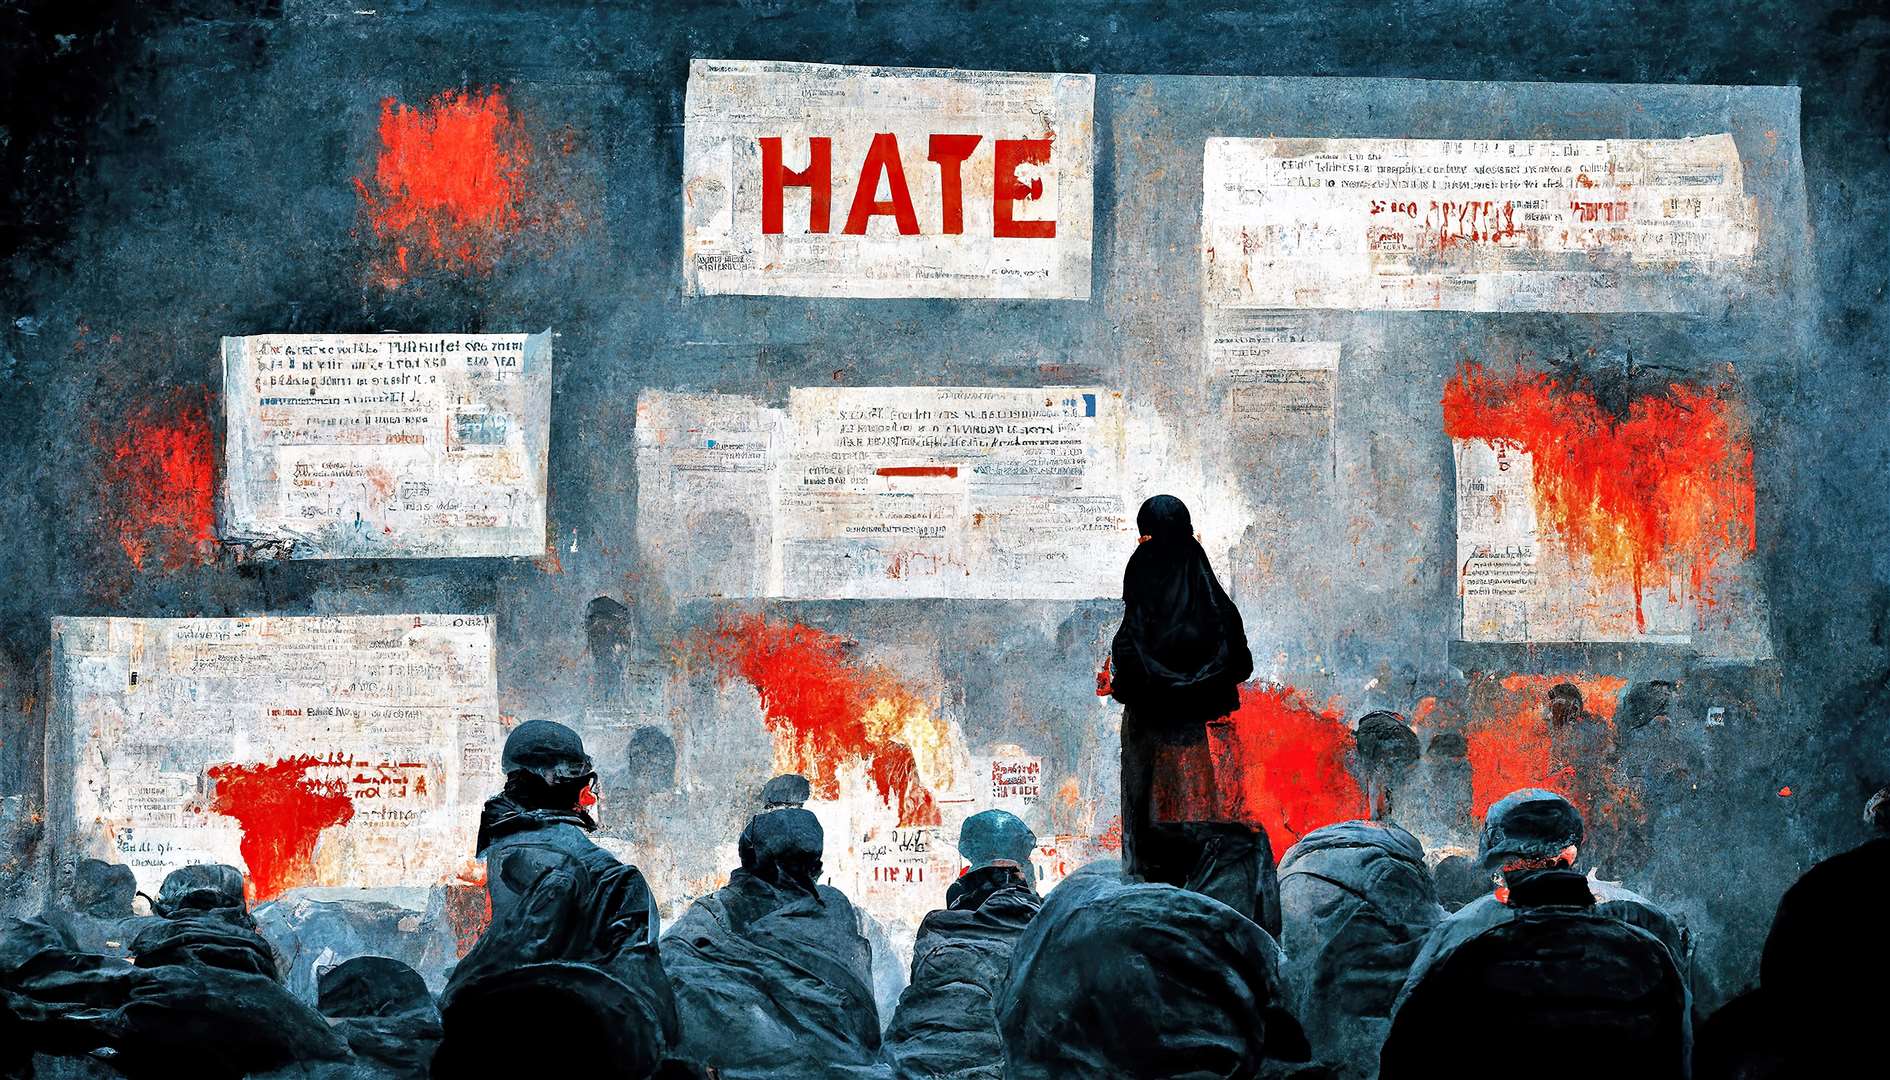 Hate speech expresses, encourages, stirs up, or incites hatred against a group of individuals such as race, ethnicity, gender, religion, nationality, and sexual orientation. Picture: AdobeStock